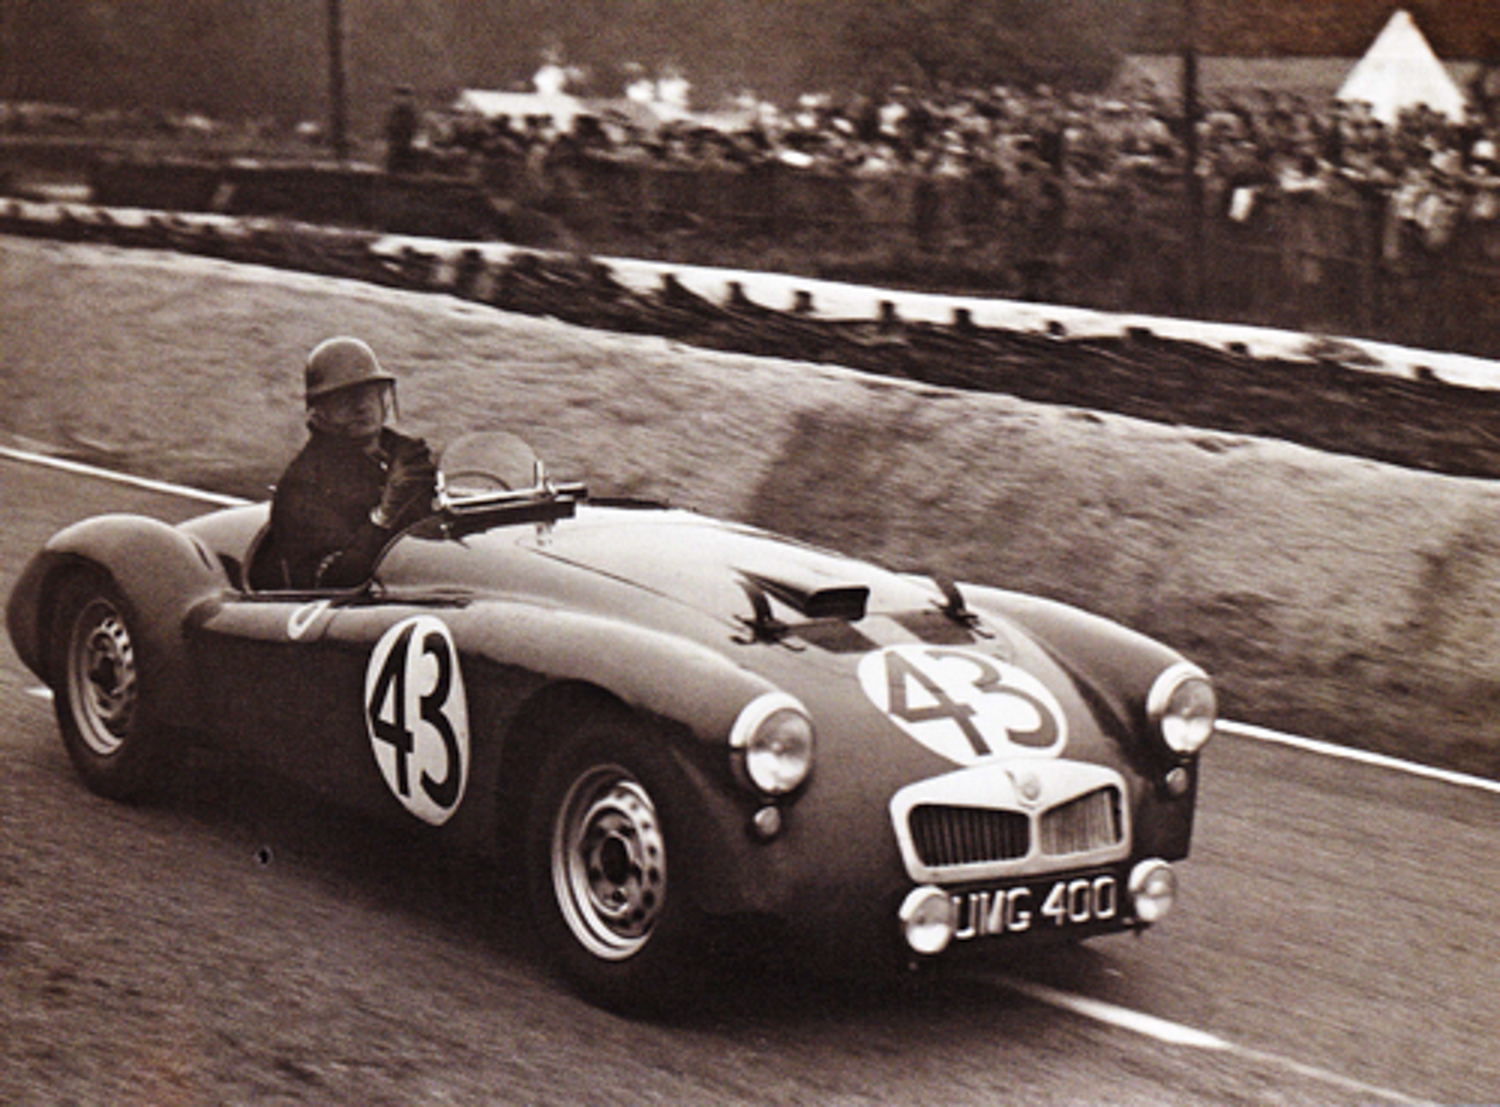 UMG 400 was an aero TD designed for Le Mans in 1951. It became the basis for the MGA's shape. 